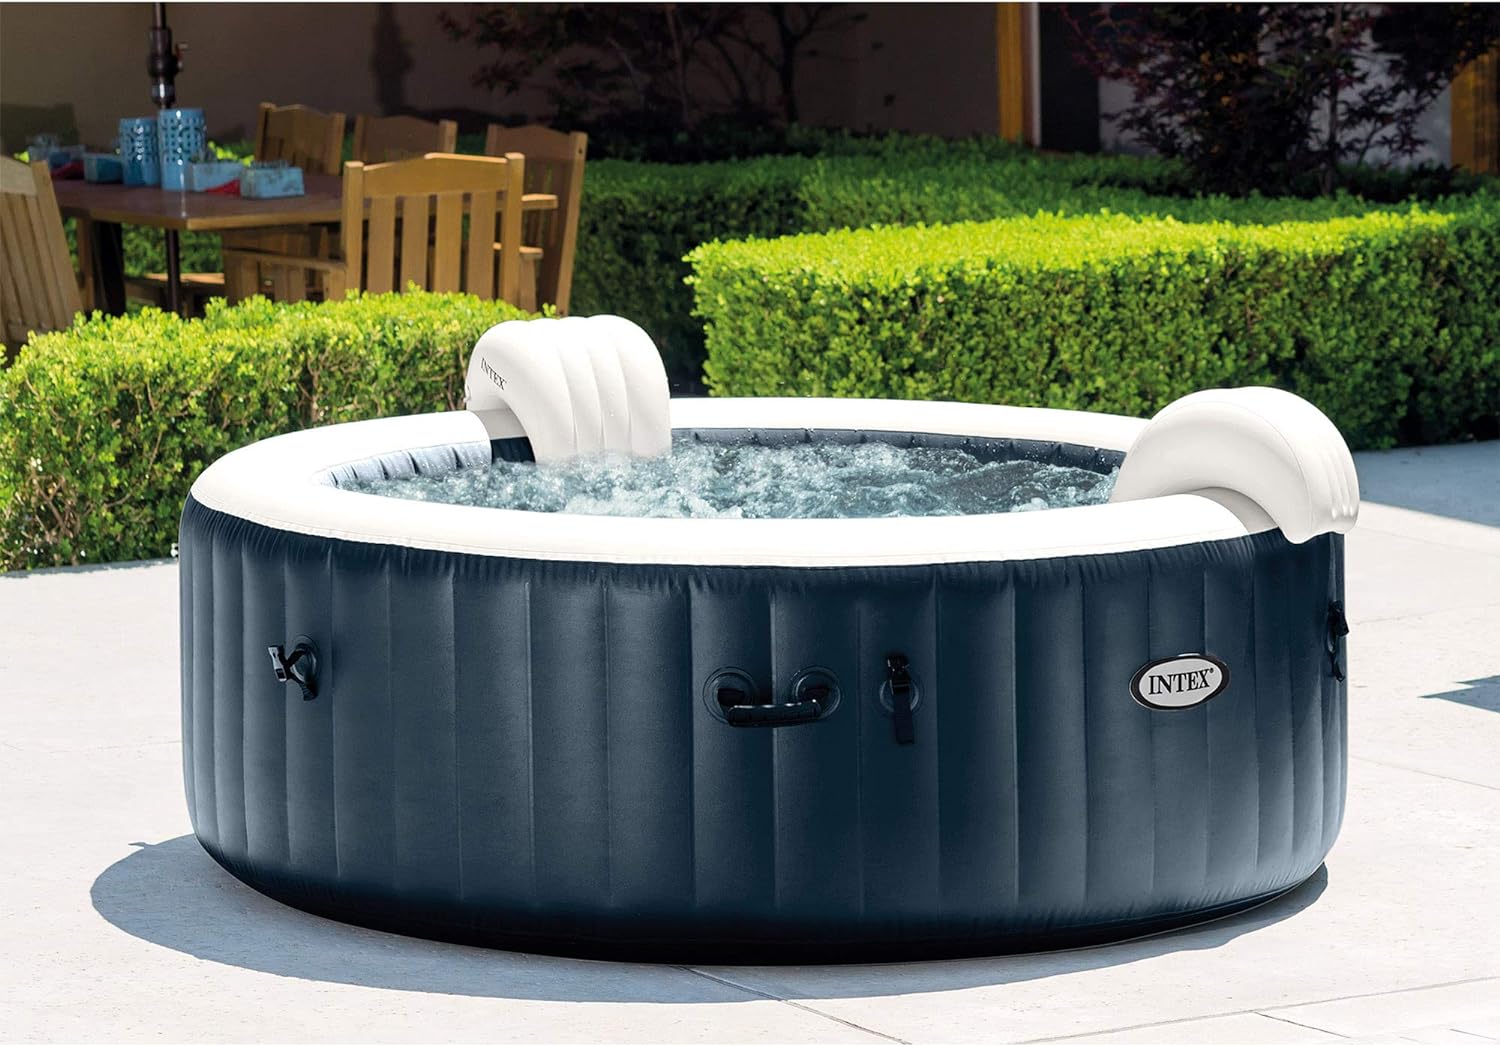 How To Heat Up An Inflatable Hot Tub Faster